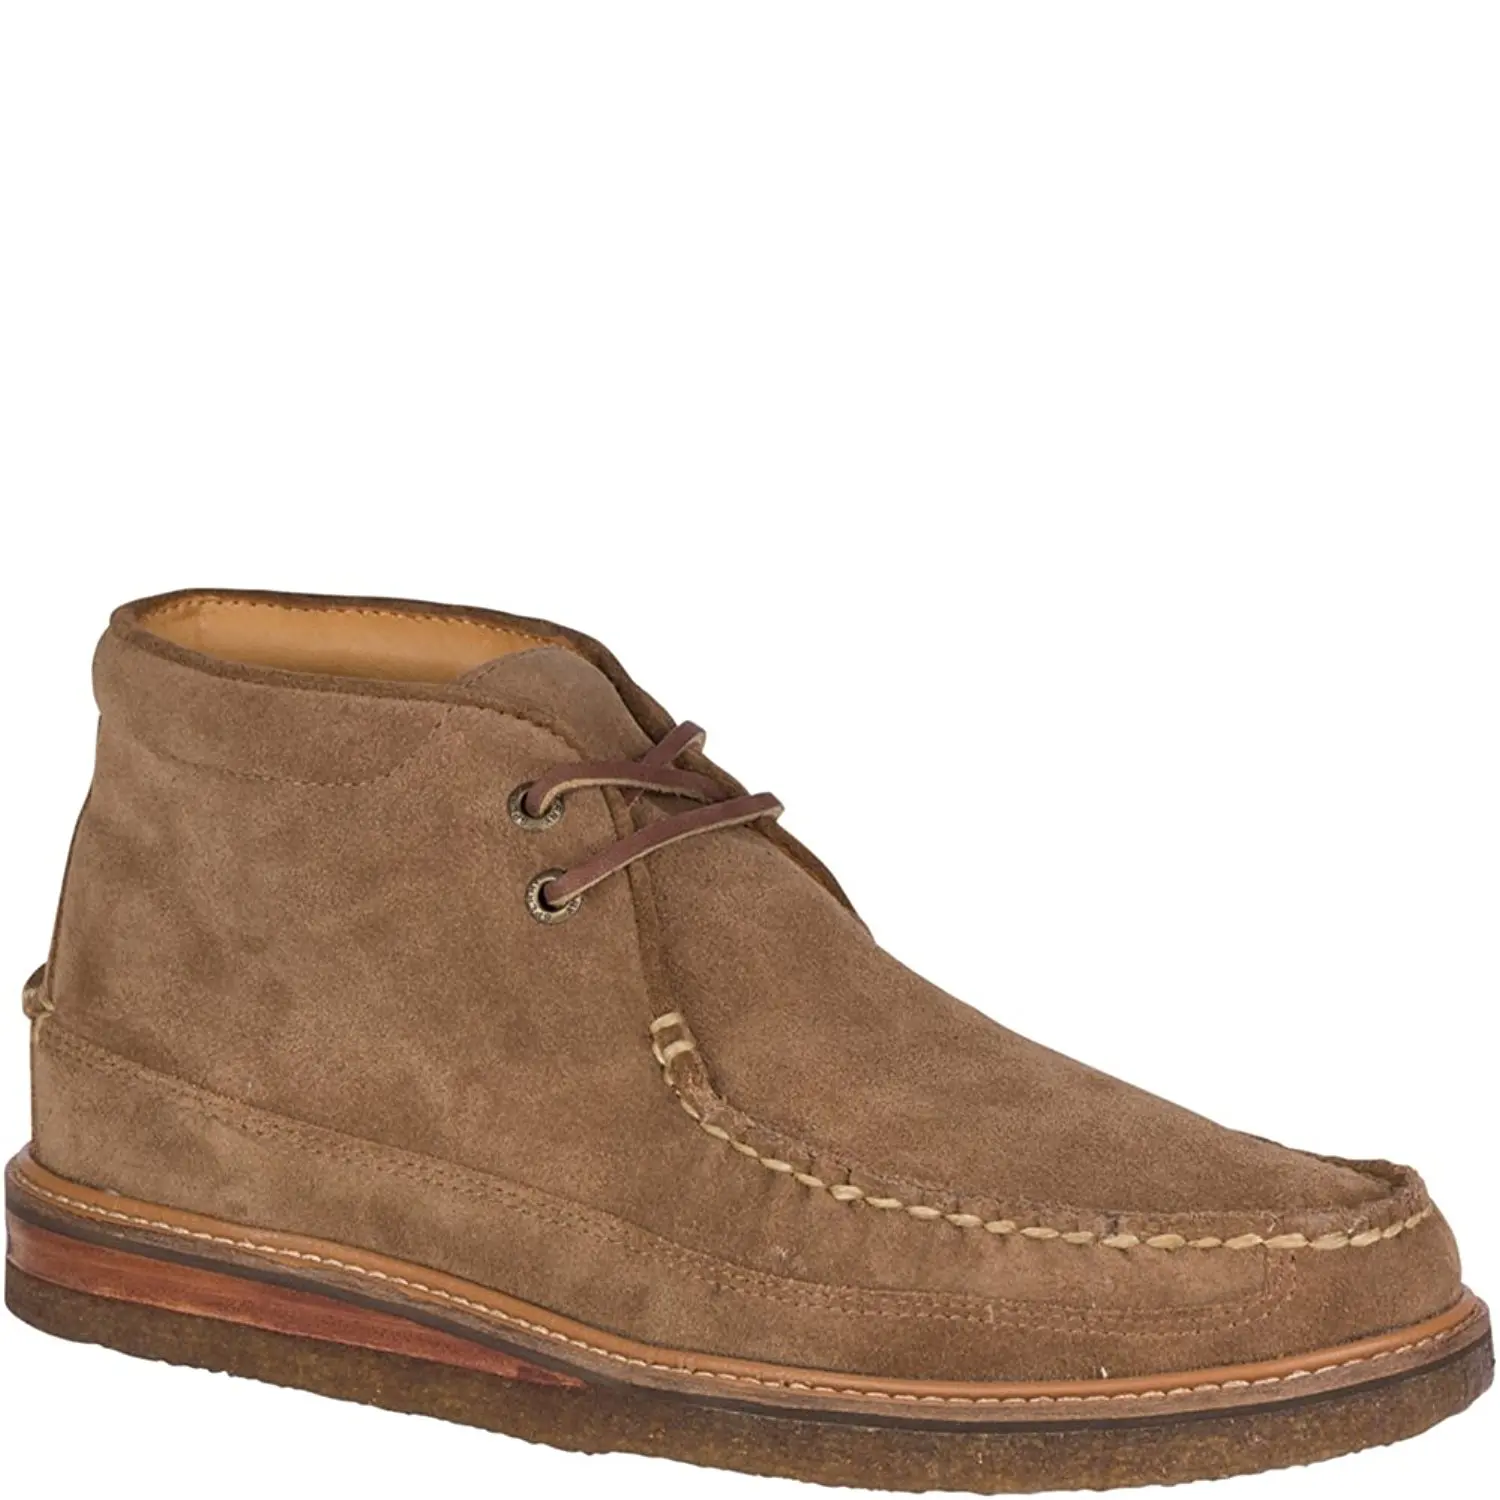 men's gold cup leather crepe chukka